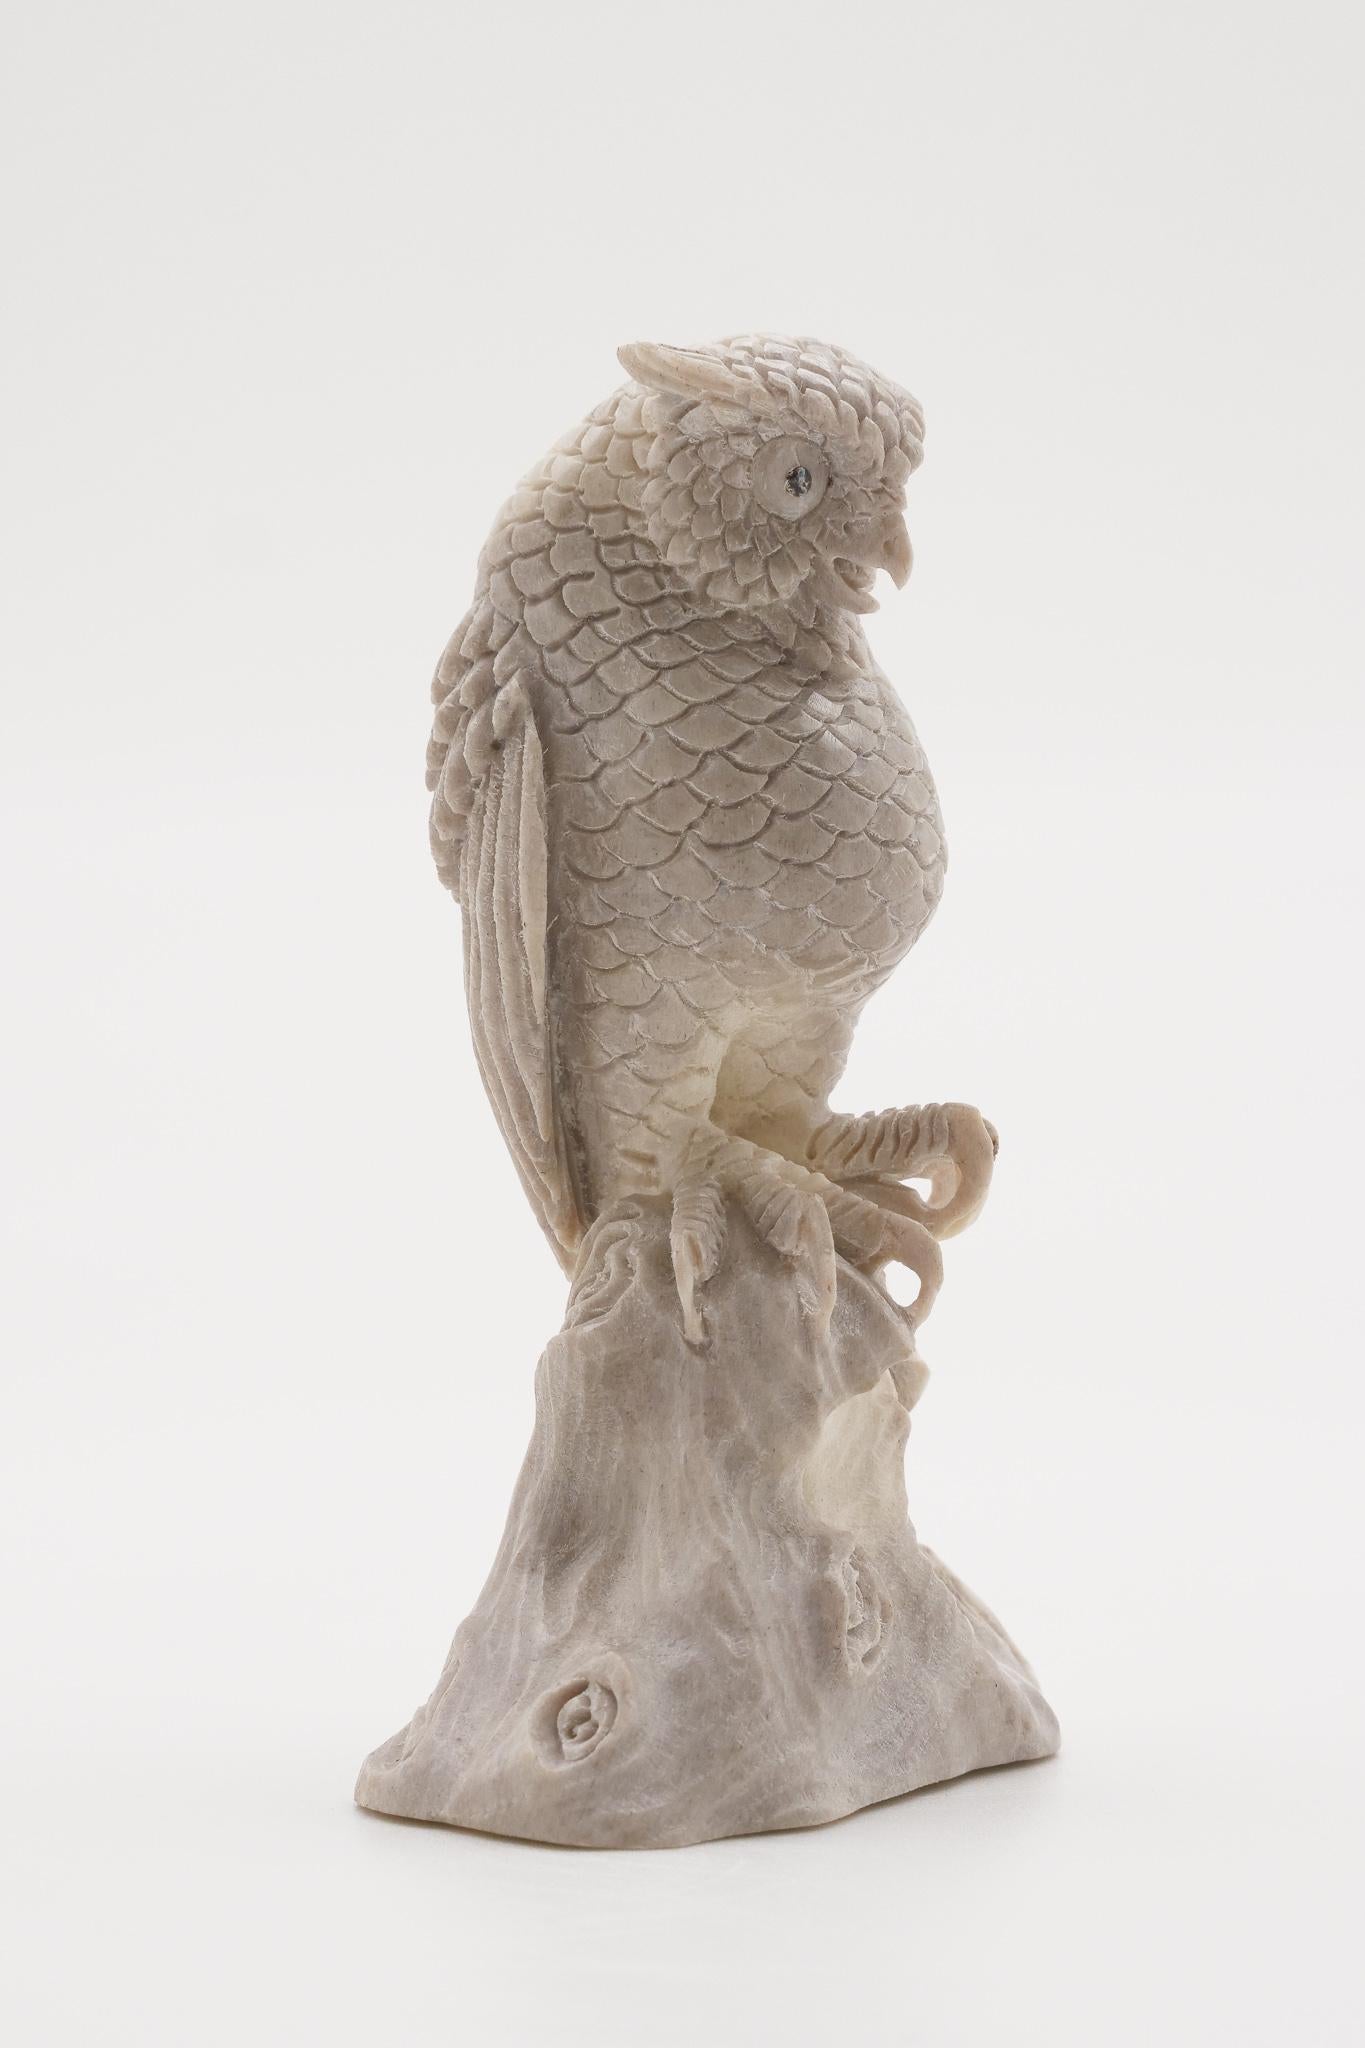 Moose antler carving of a perched horned owl. Antler was sourced in North America, then sent to Asia for carving. Quality of ivory, but with sustainability, as the moose naturally shed their antlers.